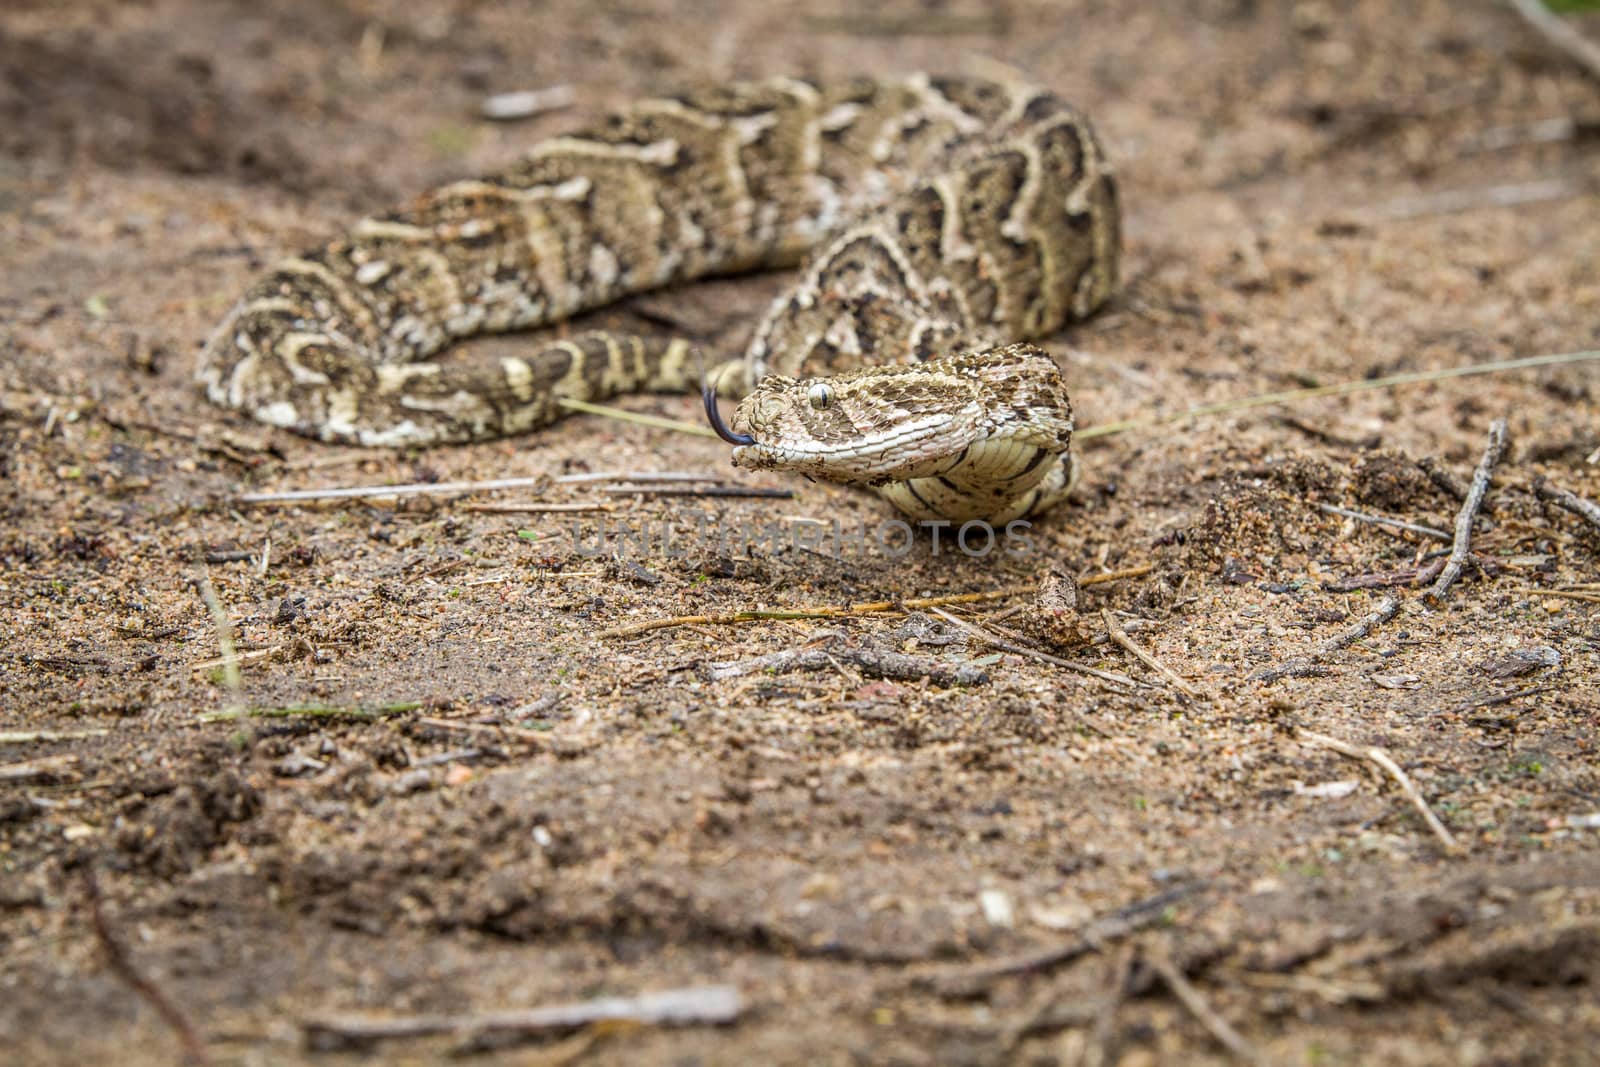 Puff adder on the ground, South Africa.